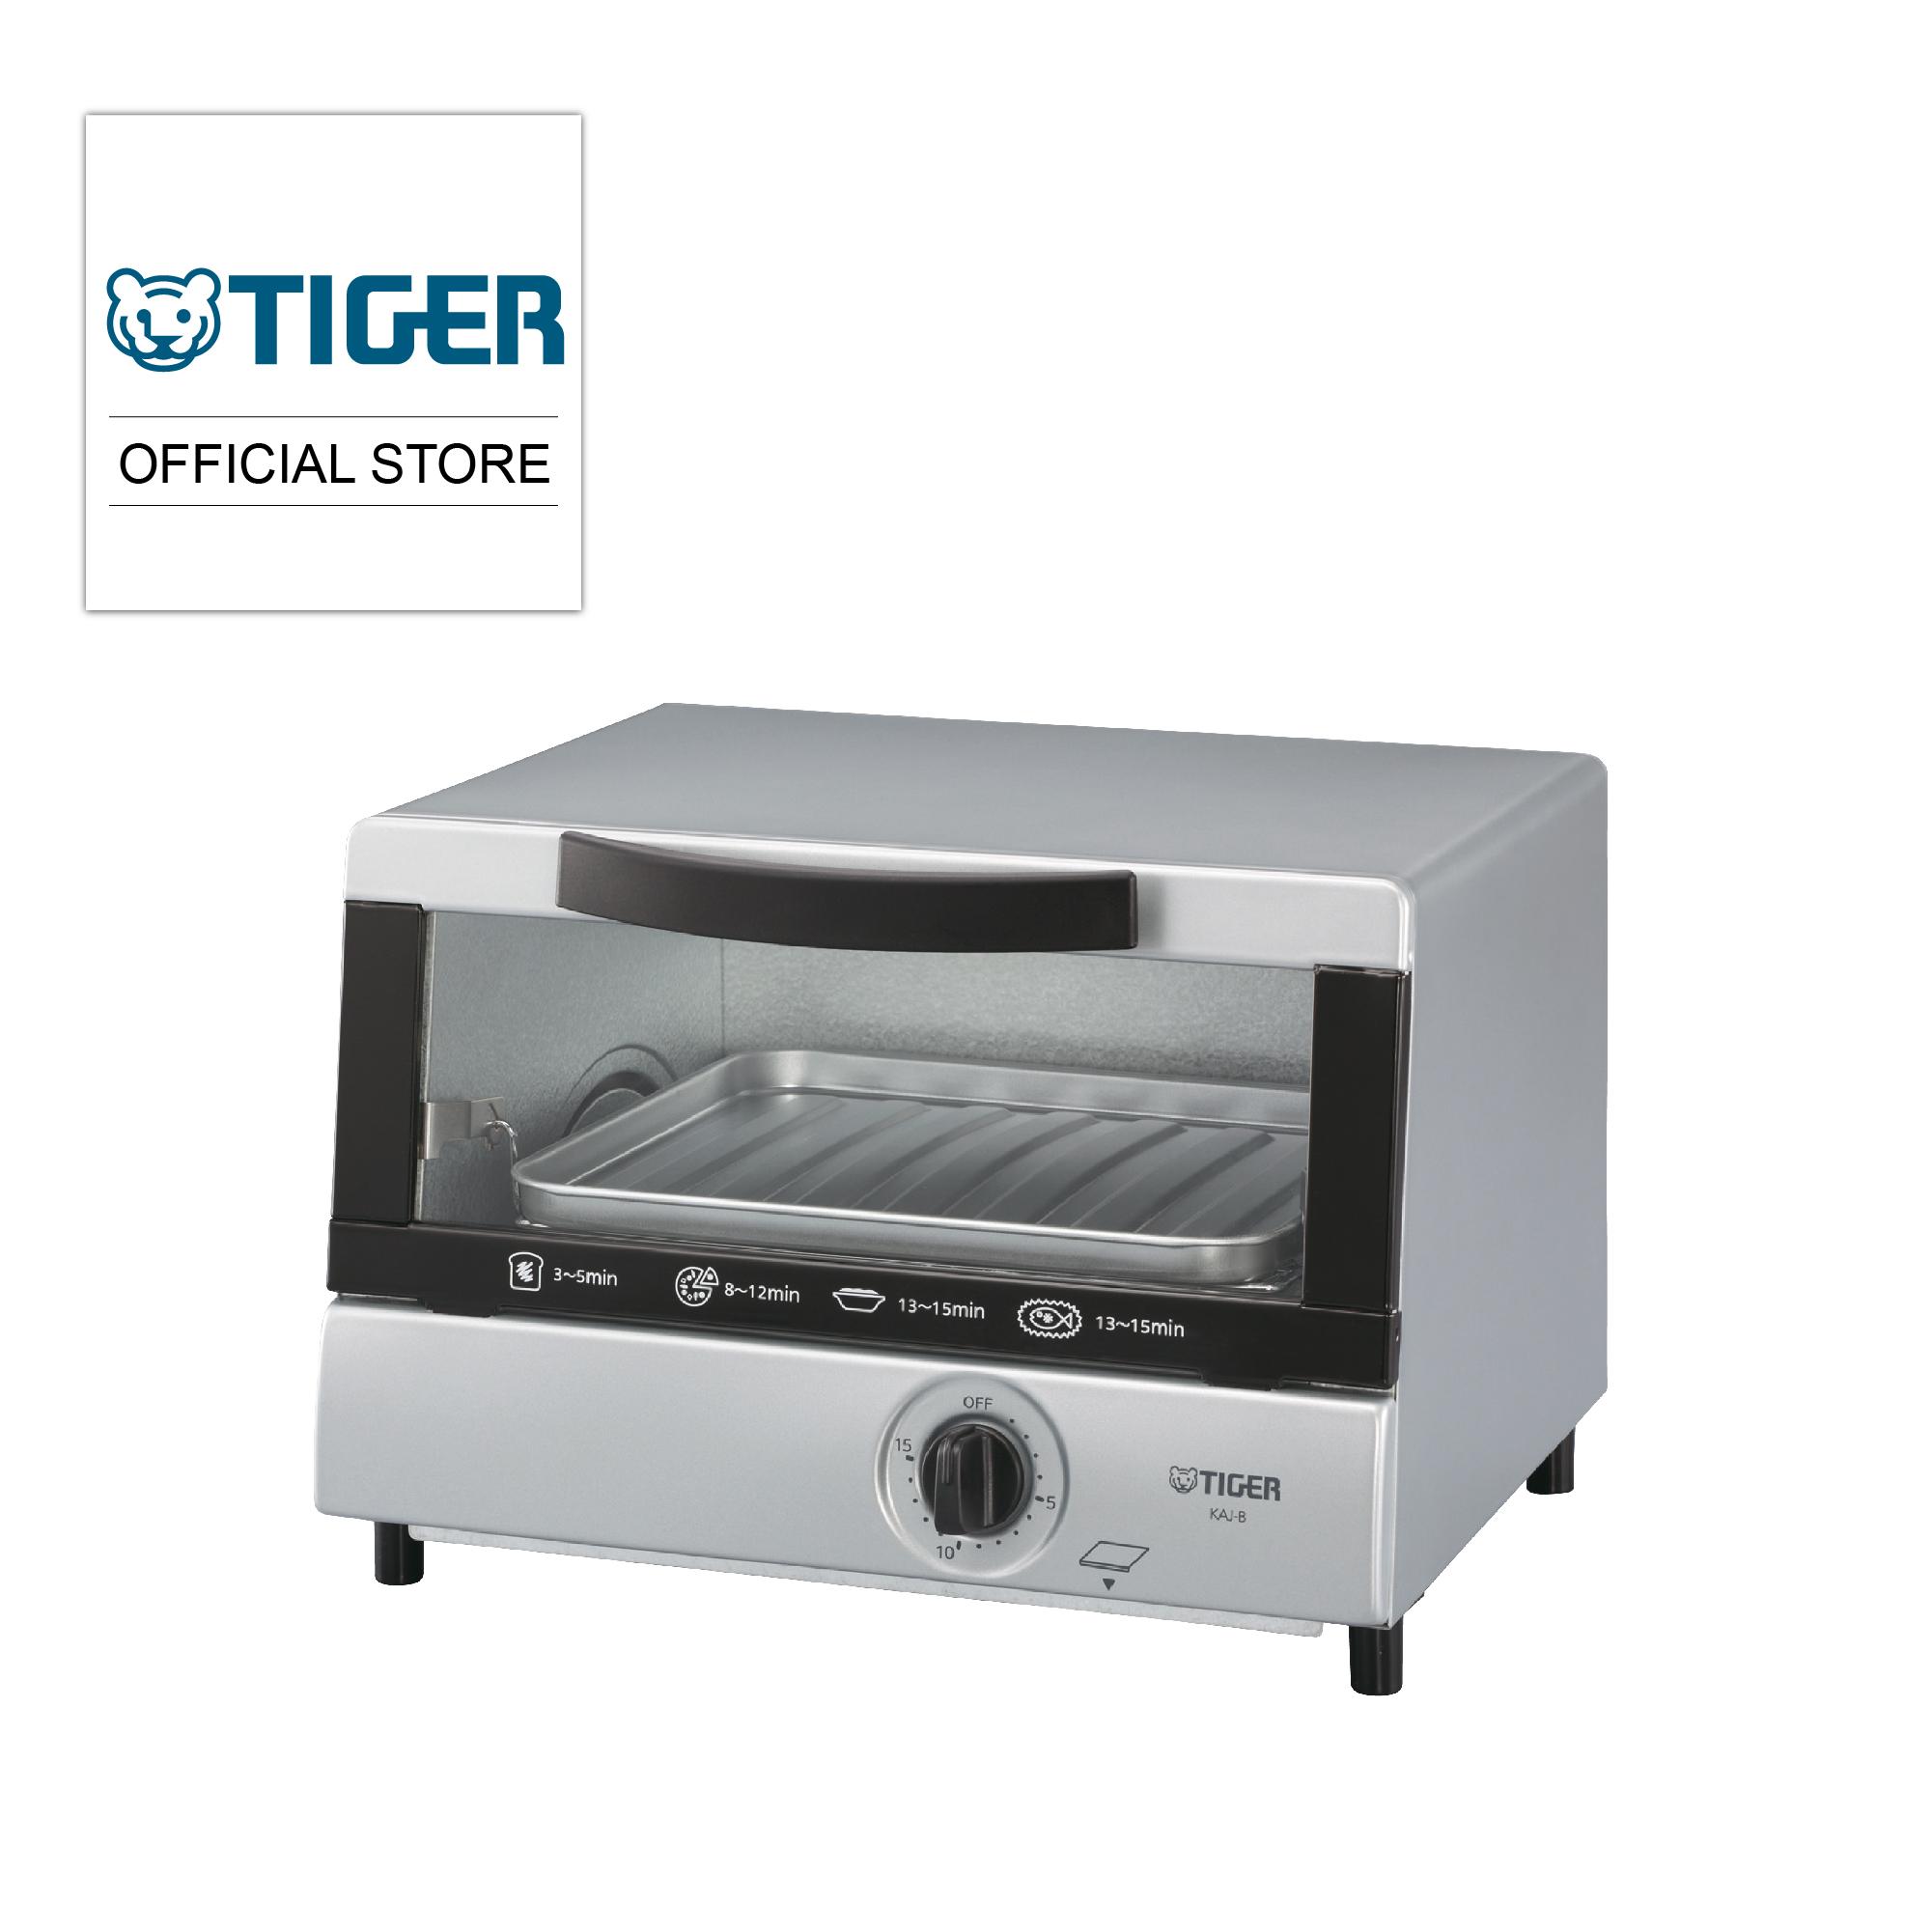 Tiger Toaster Oven - KAJ-B08S: Buy sell online Toasters with cheap price |  Lazada Singapore